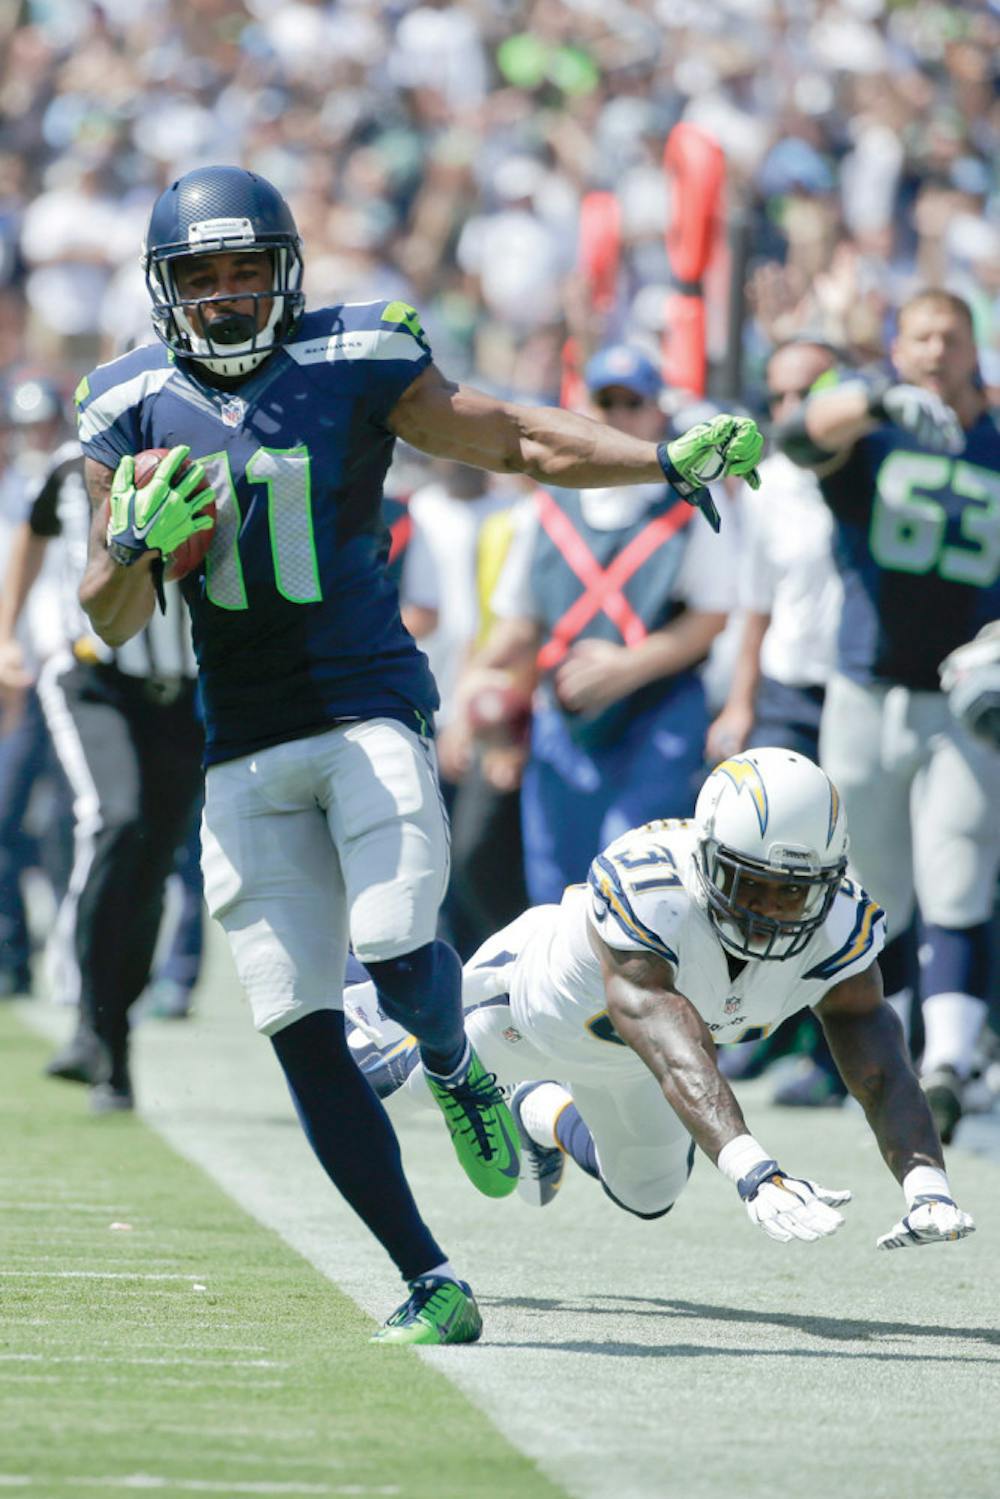 <p>Seattle Seahawks wide receiver Percy Harvin appears to step out of bounds while running for a touchdown as San Diego Chargers cornerback Richard Marshall defends on Saturday.</p>